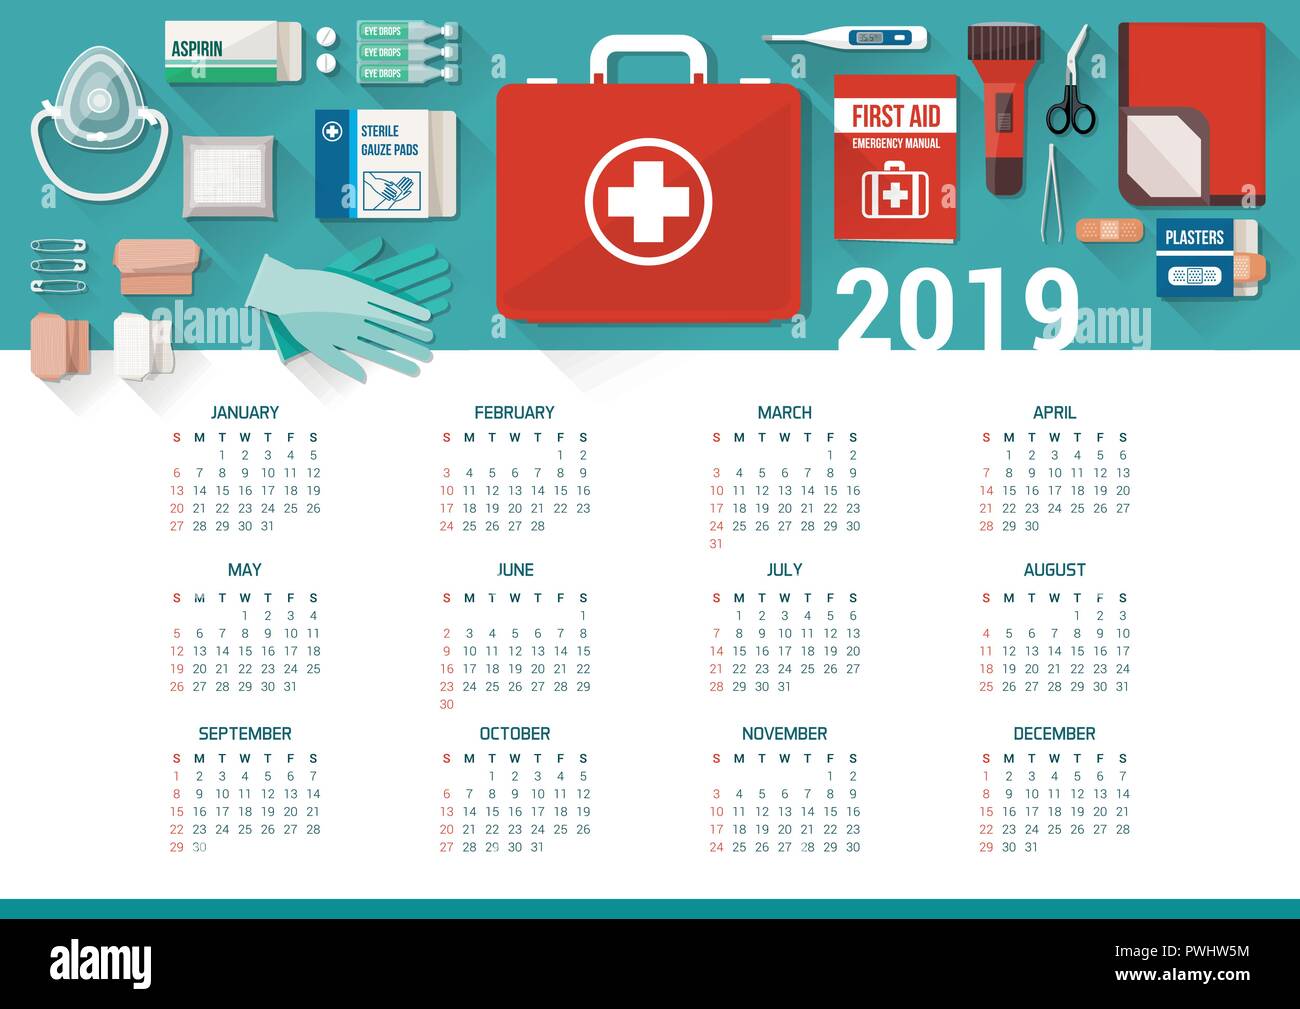 First aid kit calendar 2019 with medical supplies for emergencies, healthcare concept Stock Vector